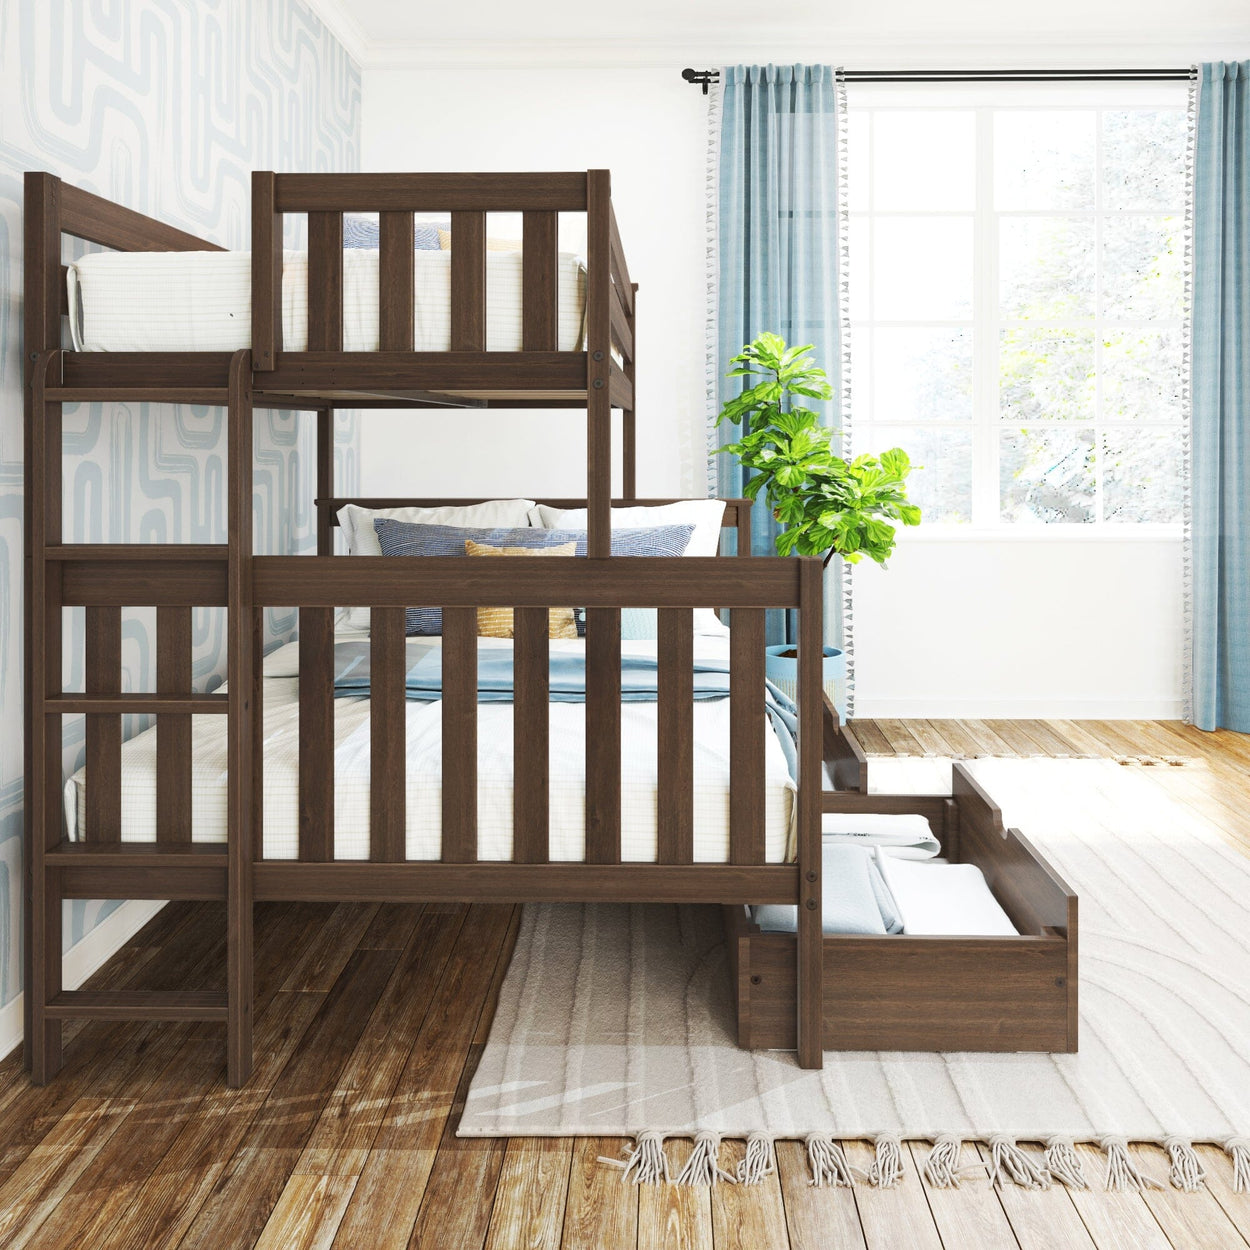 187335-008 : Bunk Beds Twin over Full Bunk Bed with Ladder on End and Storage Drawers, Walnut